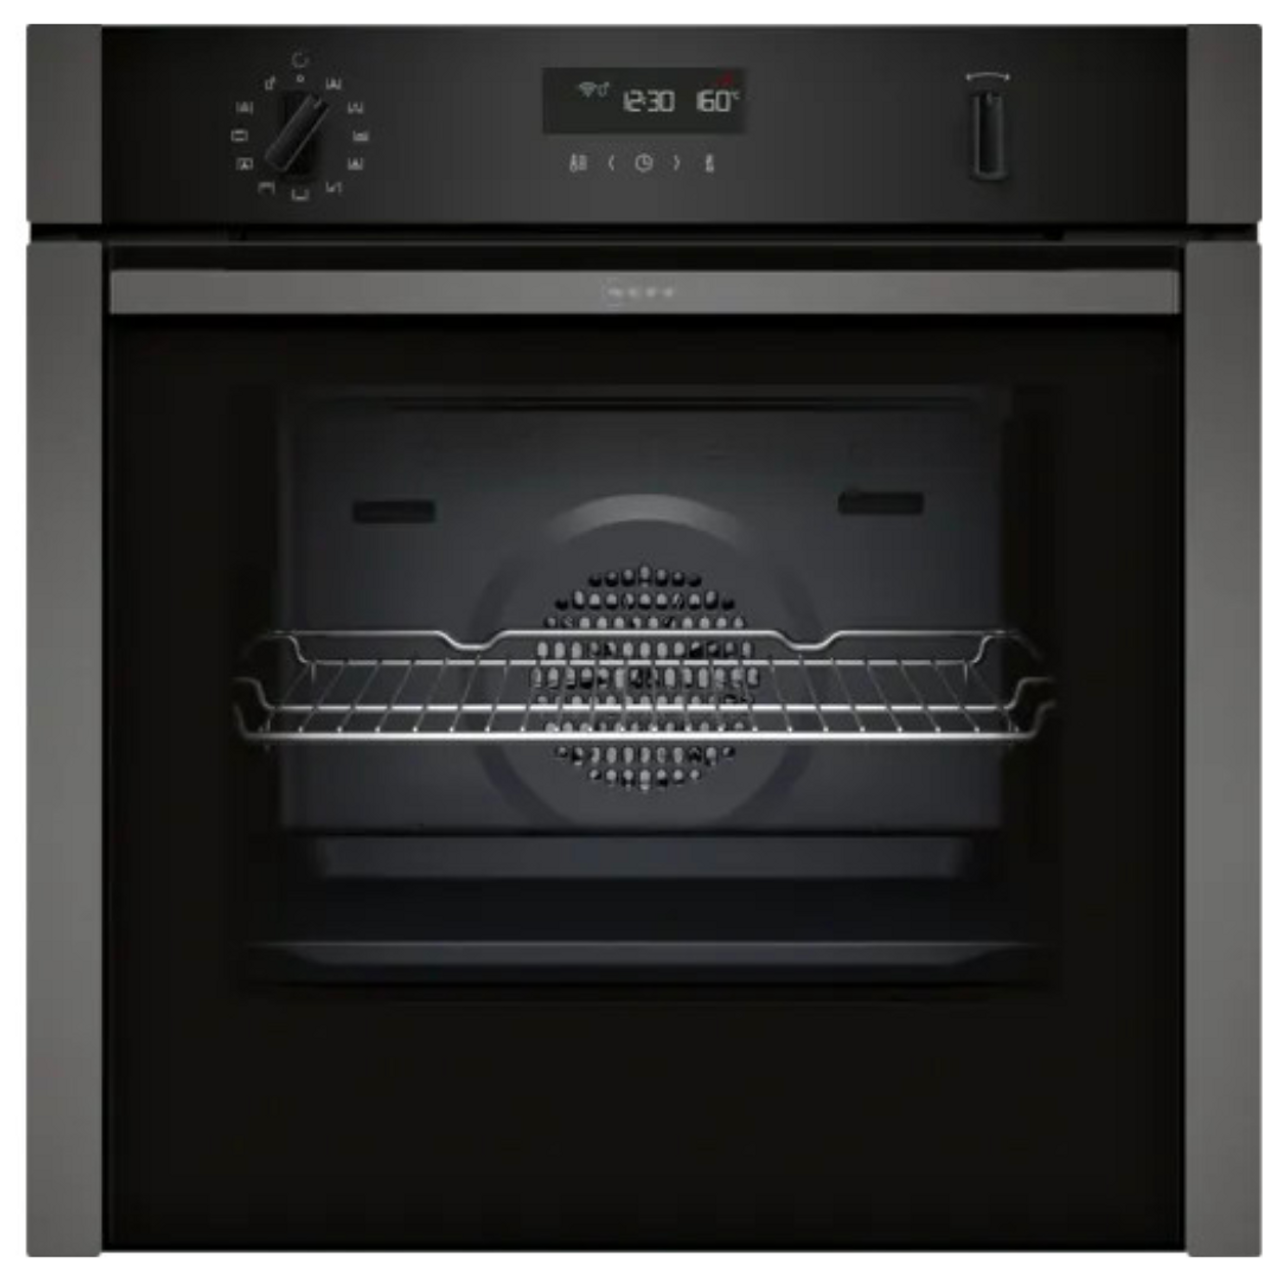 B6ACM7AG0A – 60cm Pyrolytic Built-in Oven – Graphite Grey